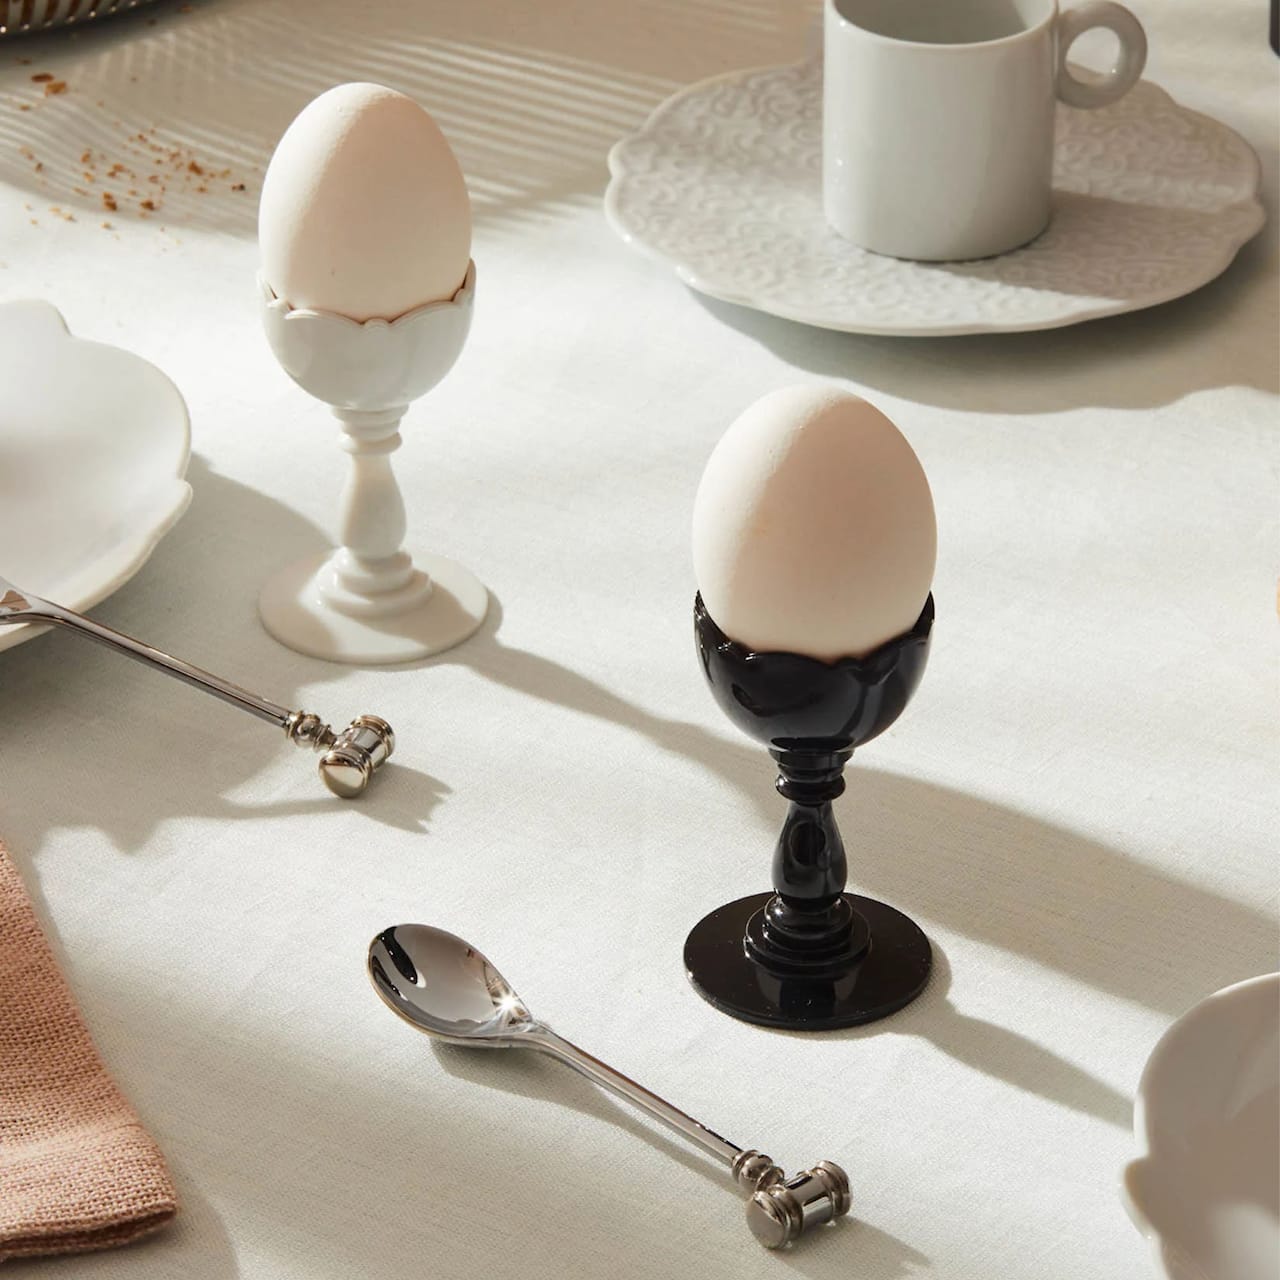 Dressed Egg cup with spoon